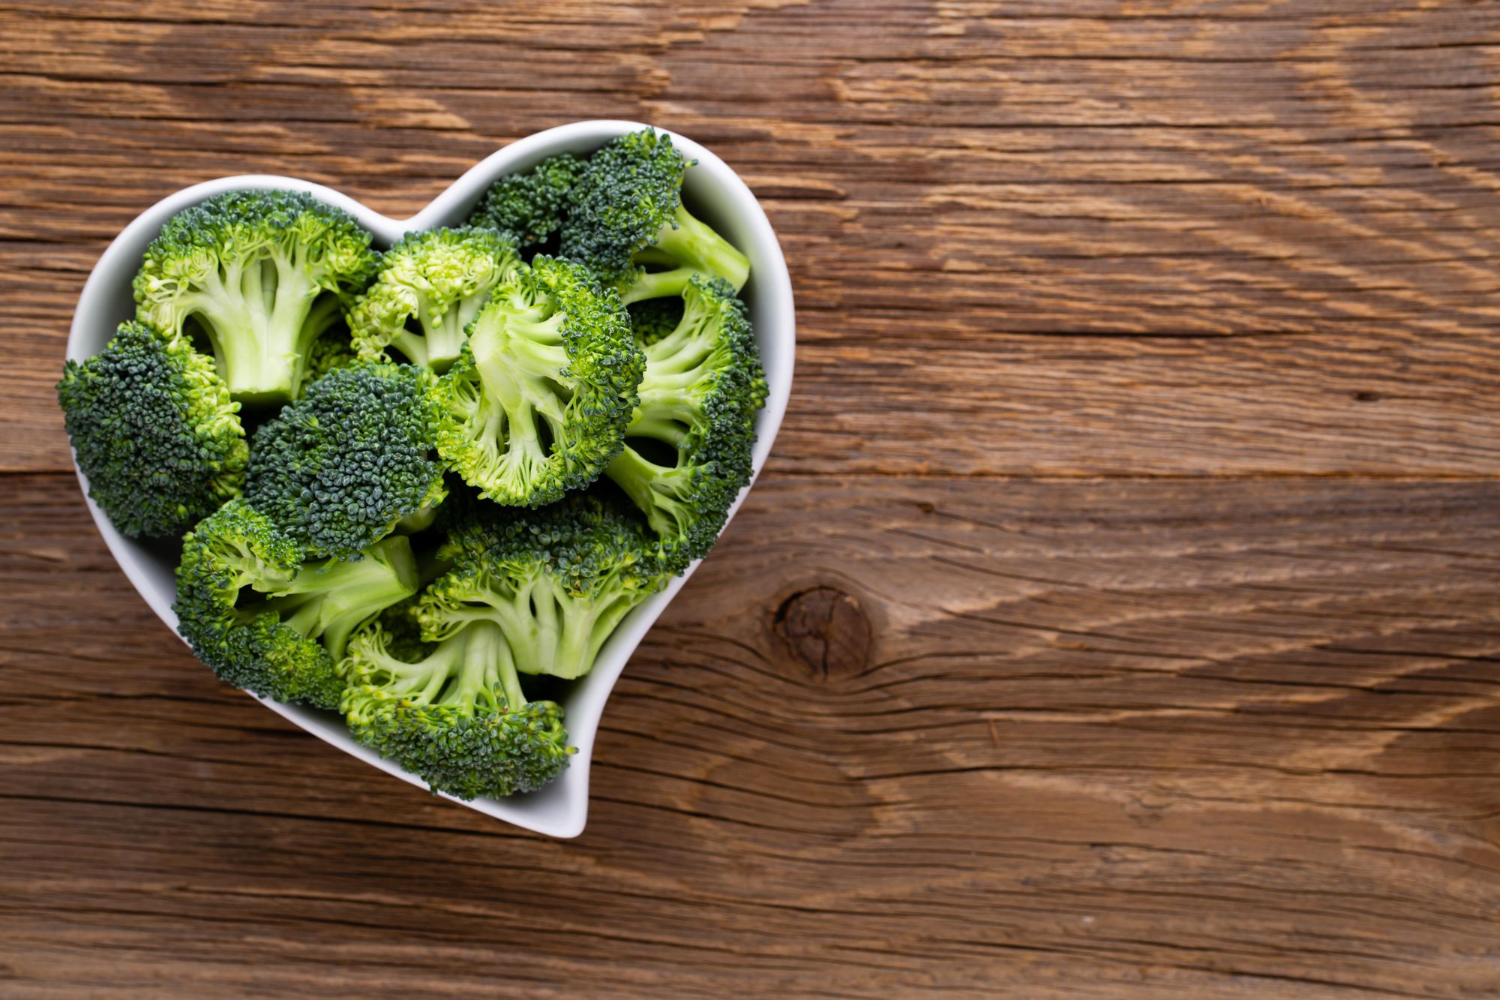 dietary meal plan fresh broccoli heart shaped bowl wooden